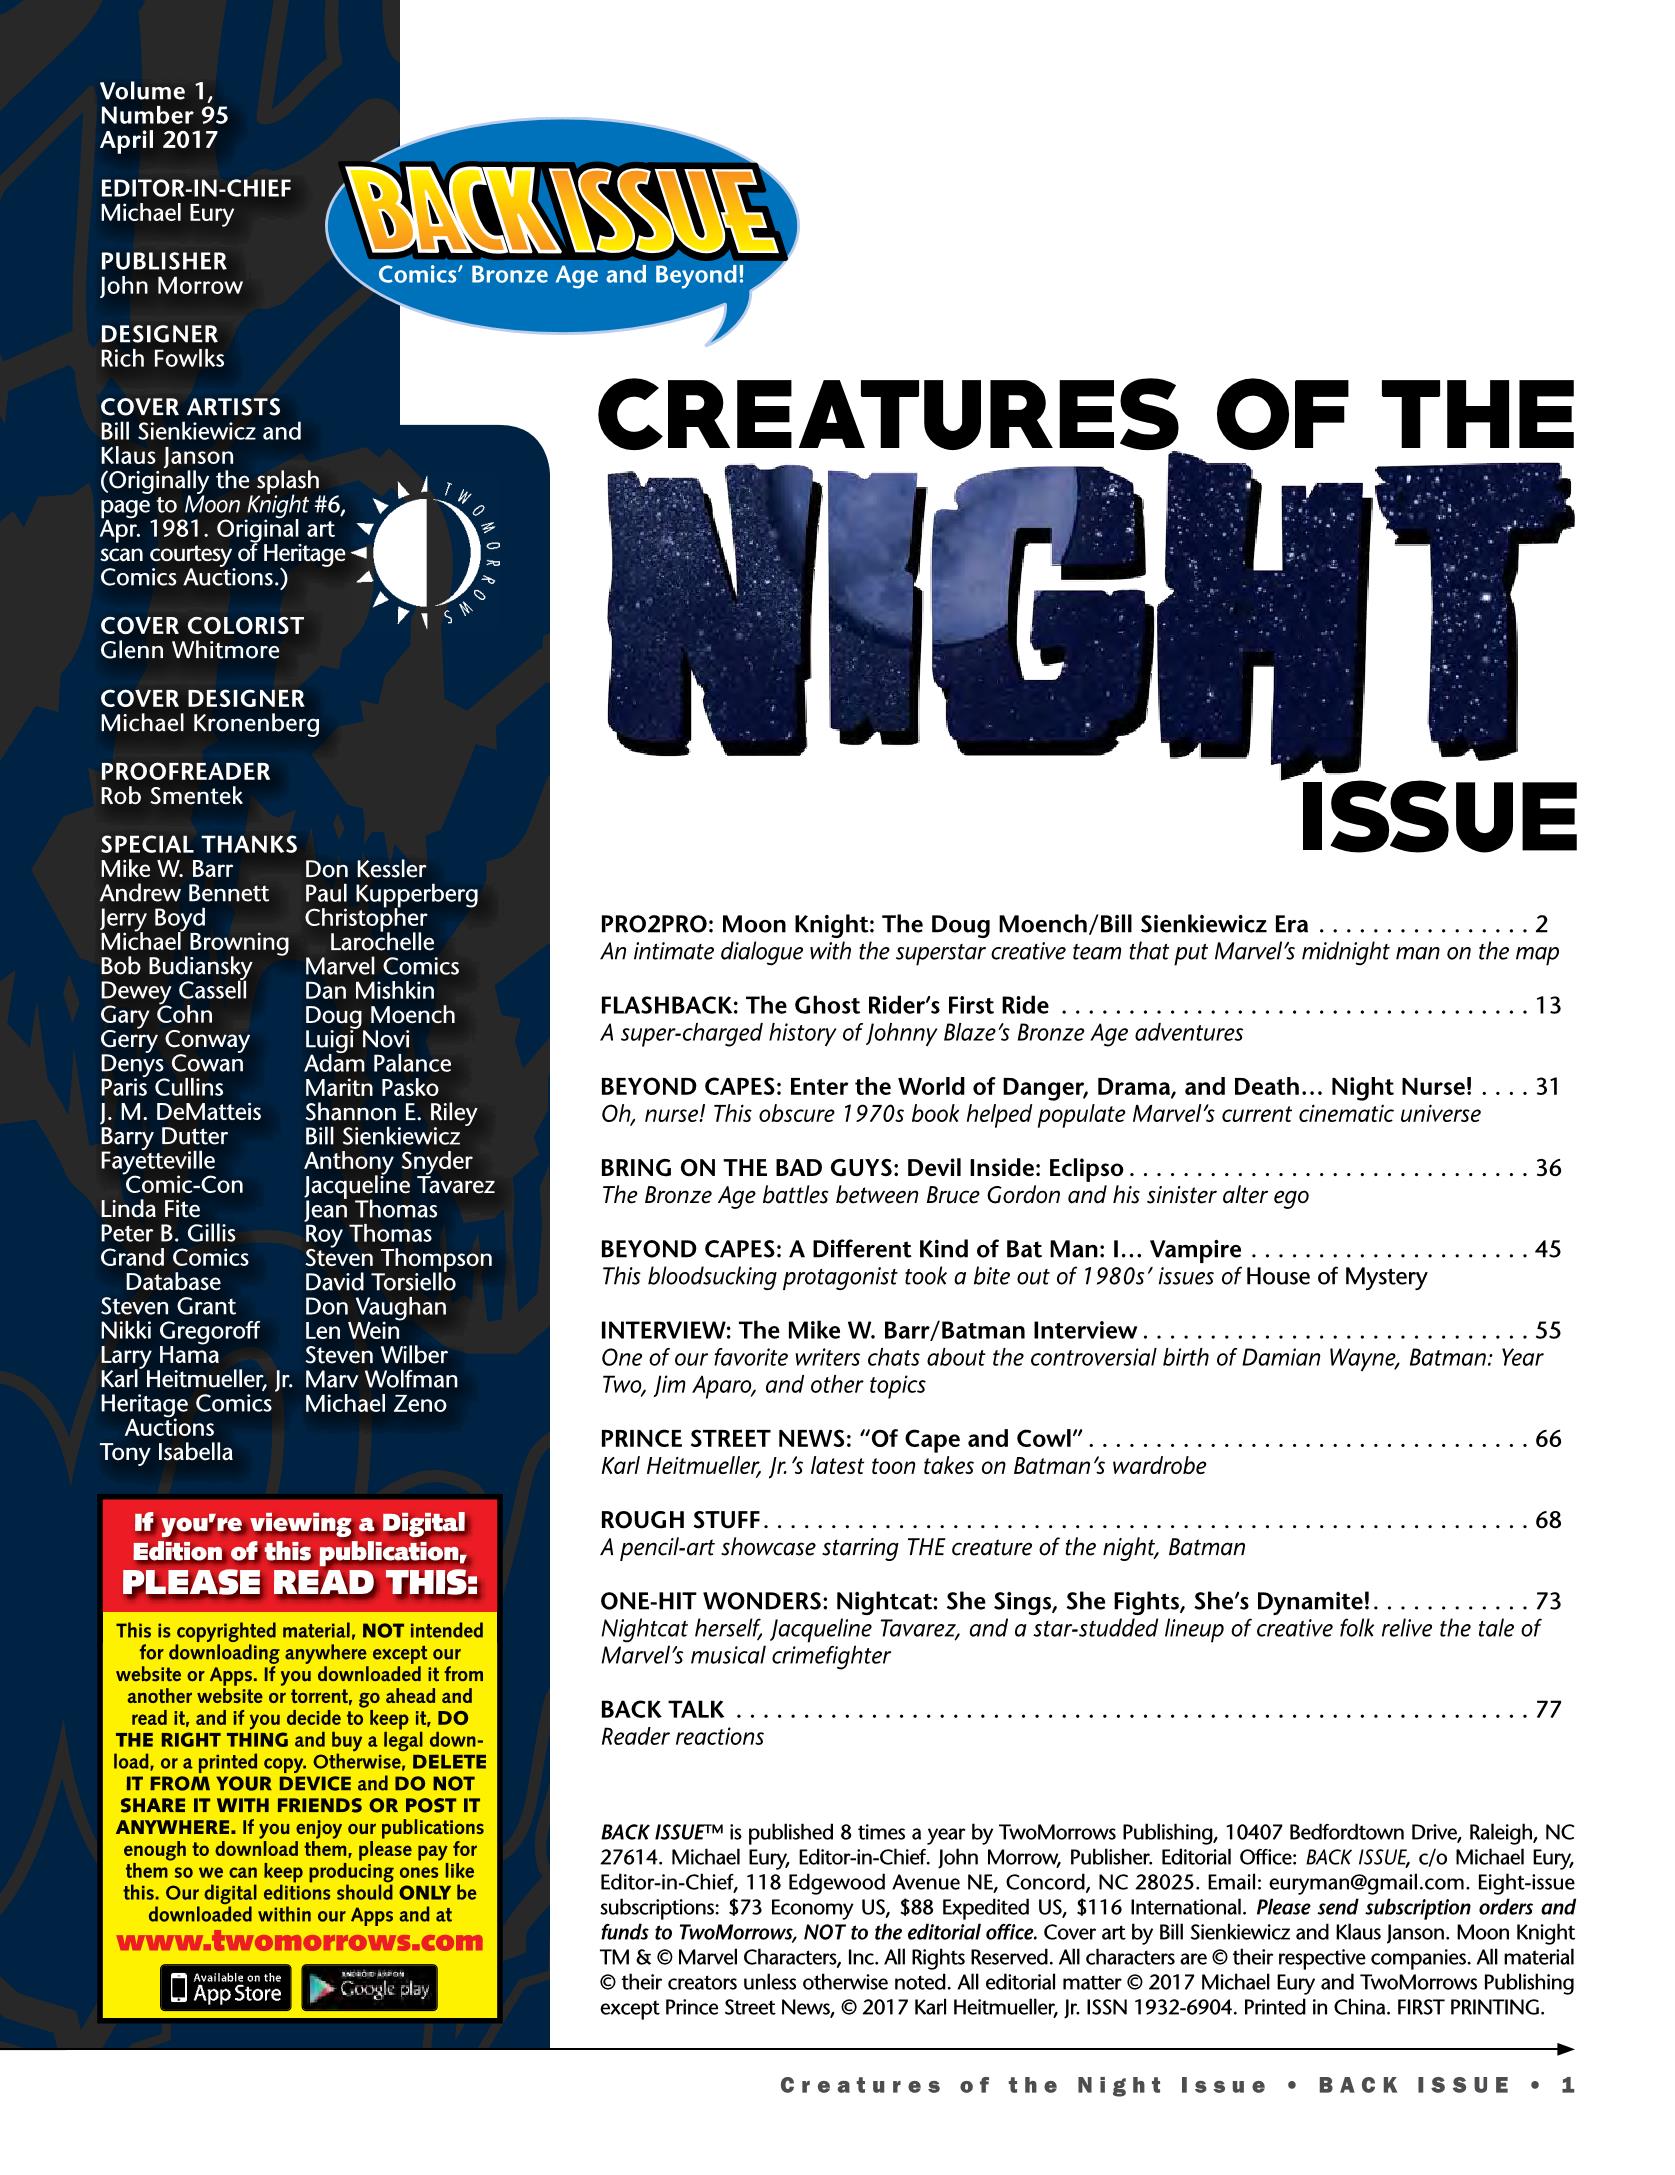 Read online Back Issue comic -  Issue #95 - 23